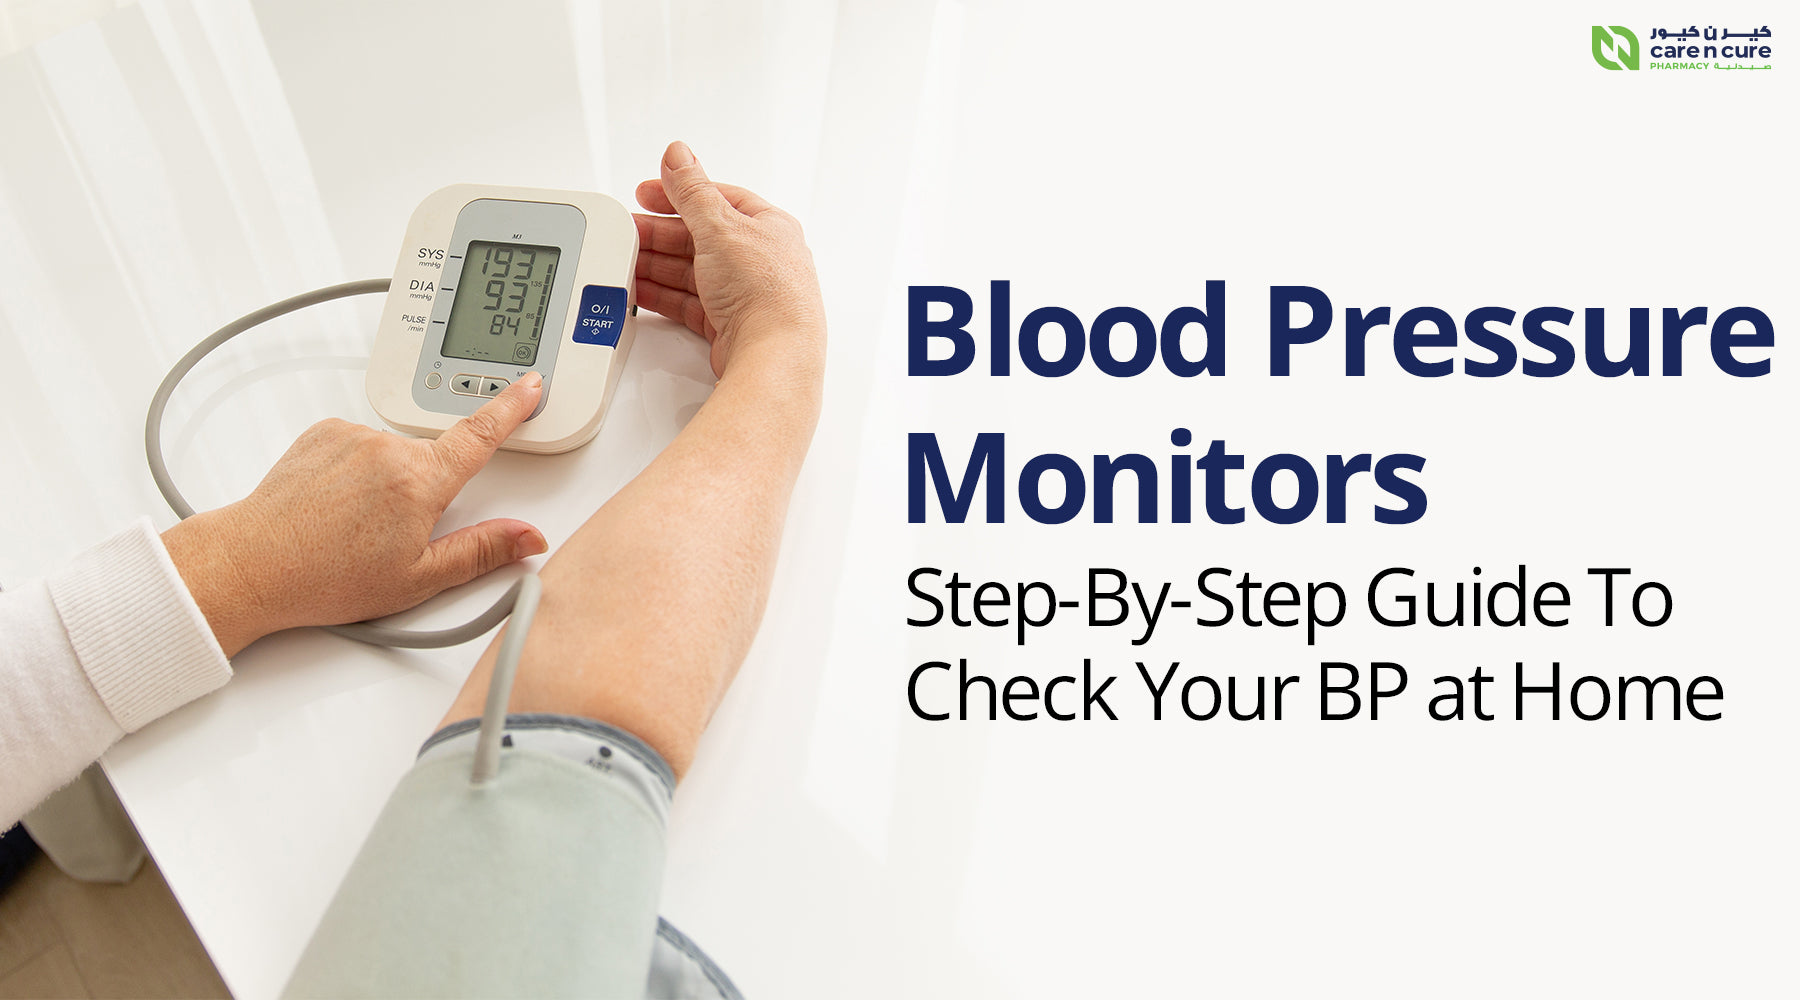 What to Look for in a Home Blood Pressure Monitor